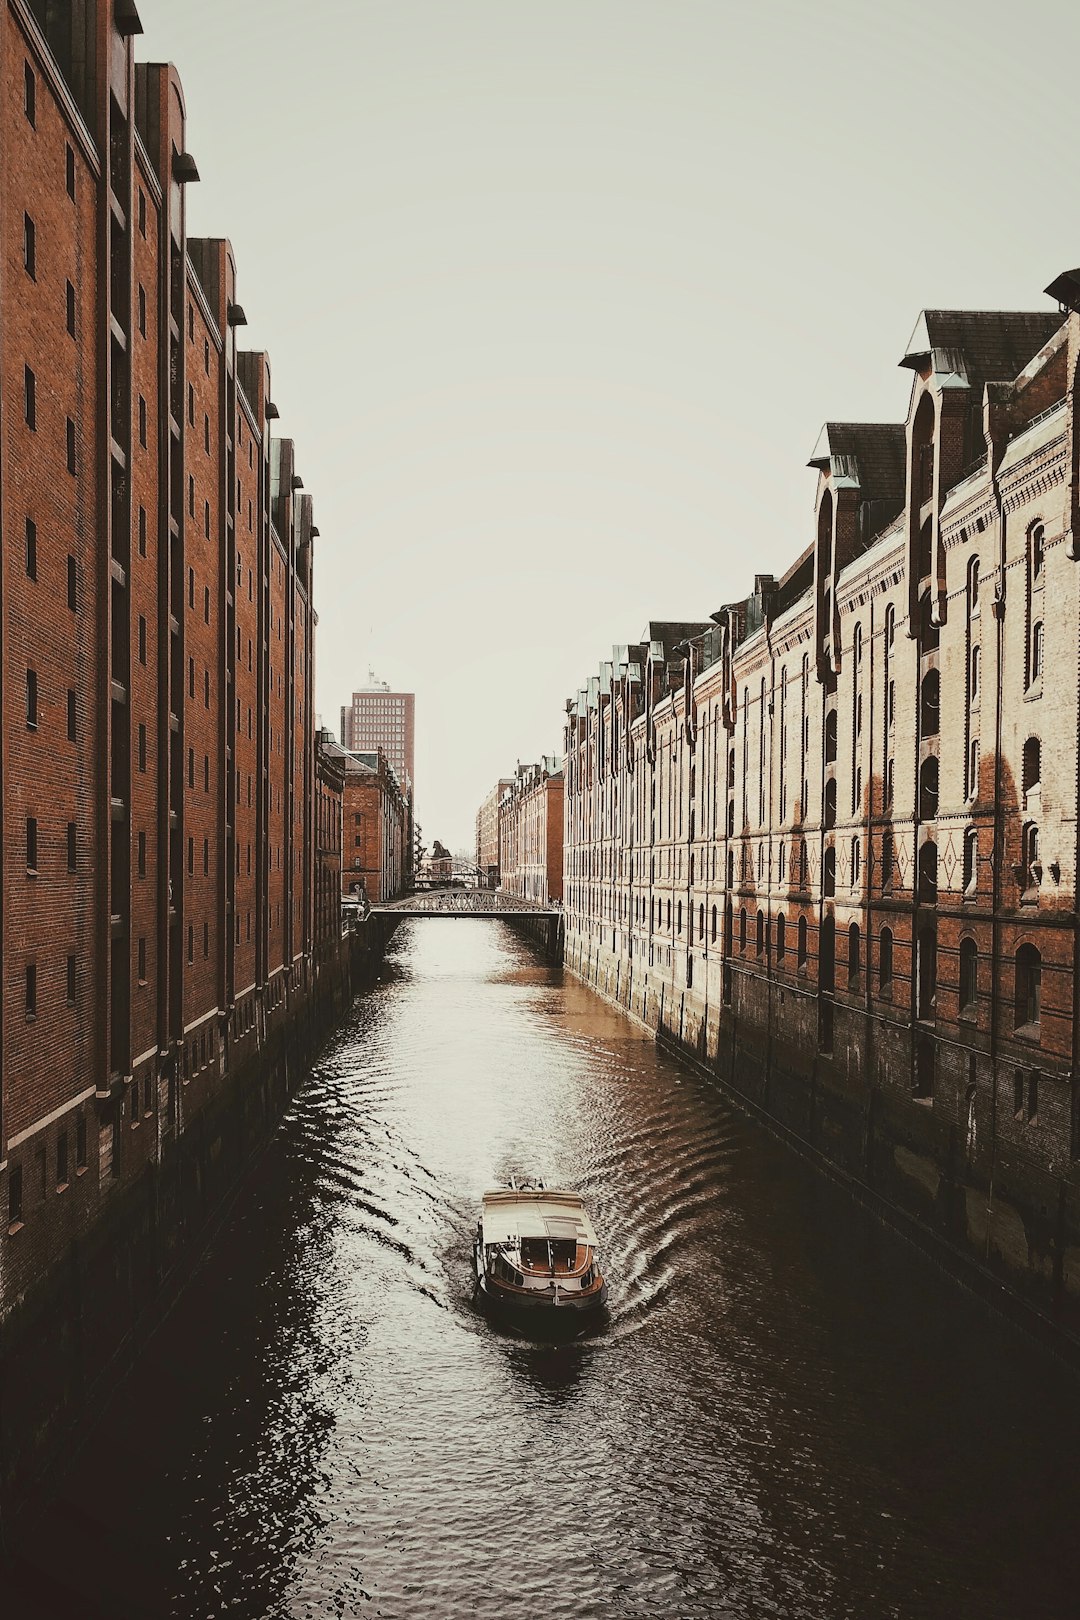 Travel Tips and Stories of HafenCity in Germany